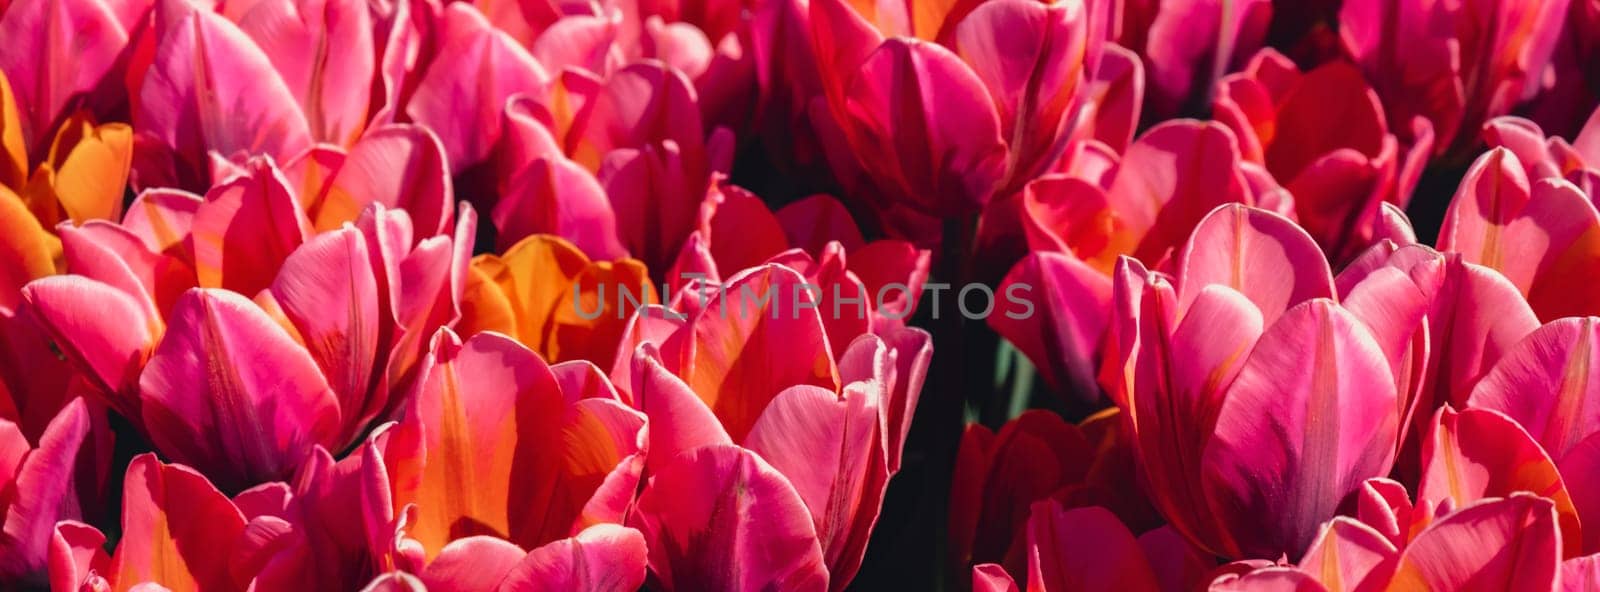 Pink Tulip flowers blooming in the garden field landscape. Beautiful spring garden with many red tulips outdoors. Blooming floral park in sunrise light. Stripped tulips growing in flourish meadow sunny day Keukenhof. Natural floral pattern by anna_stasiia